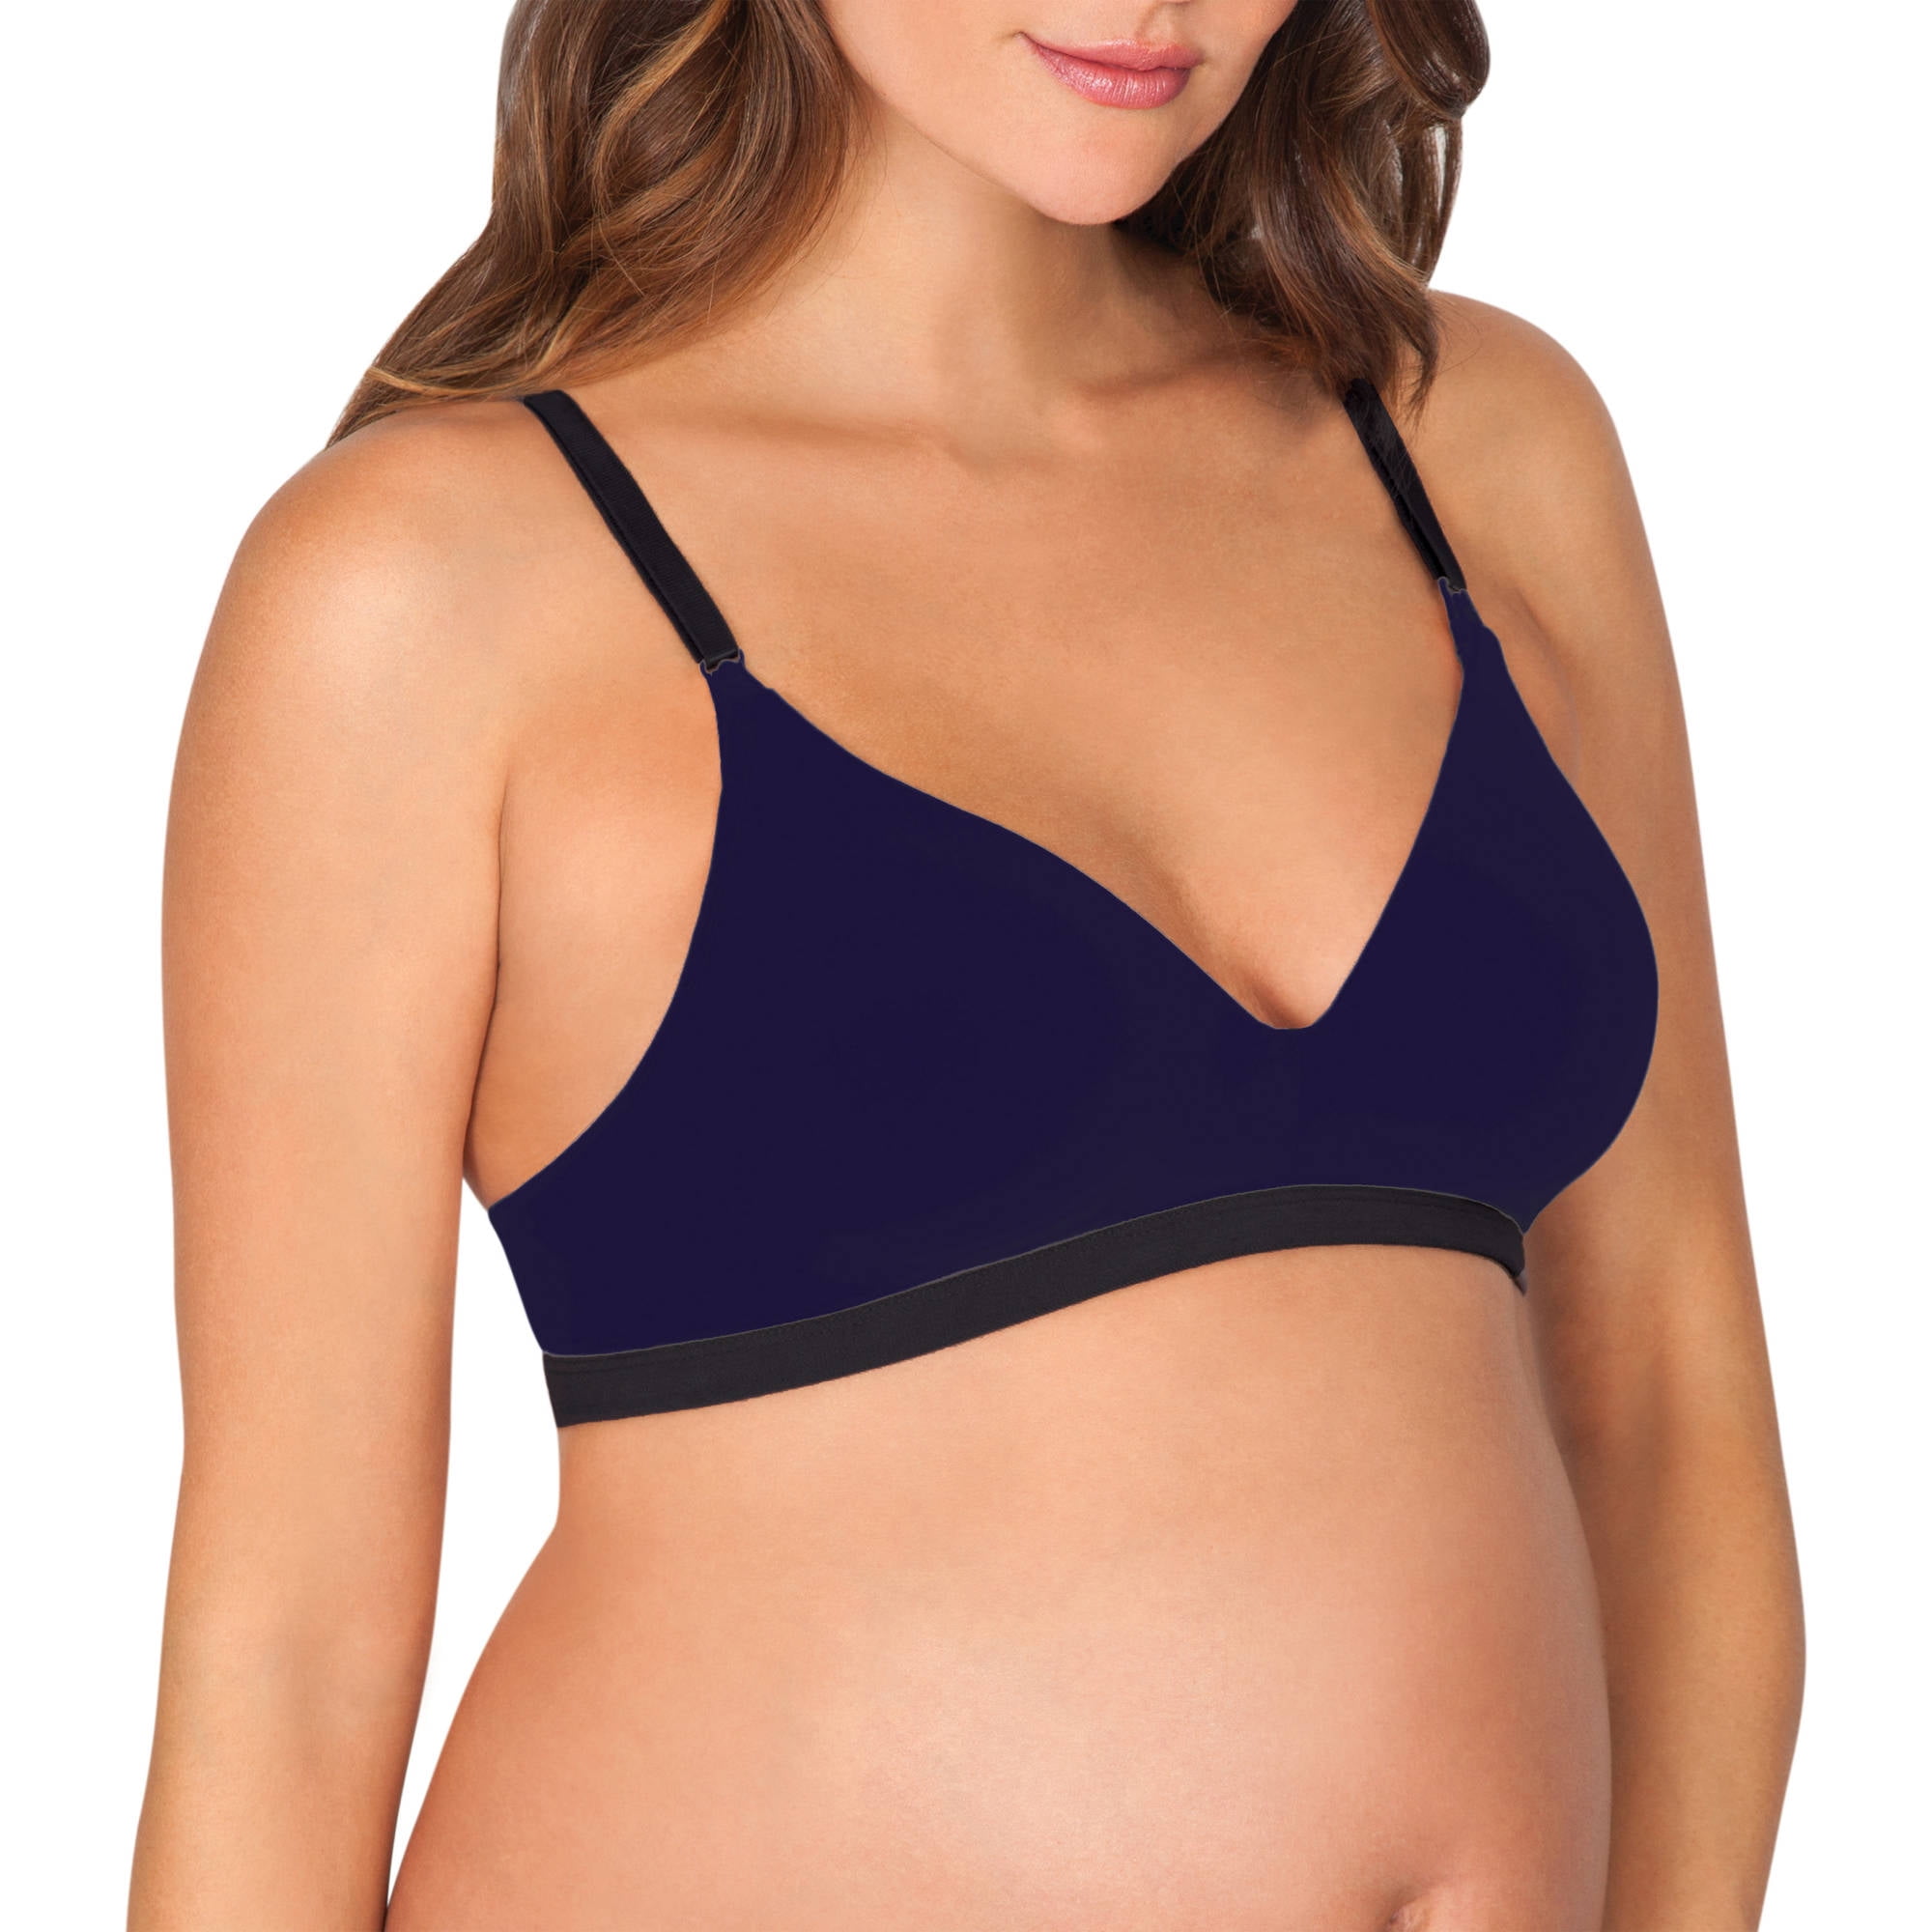 Great Expectations Maternity Bra Size Chart